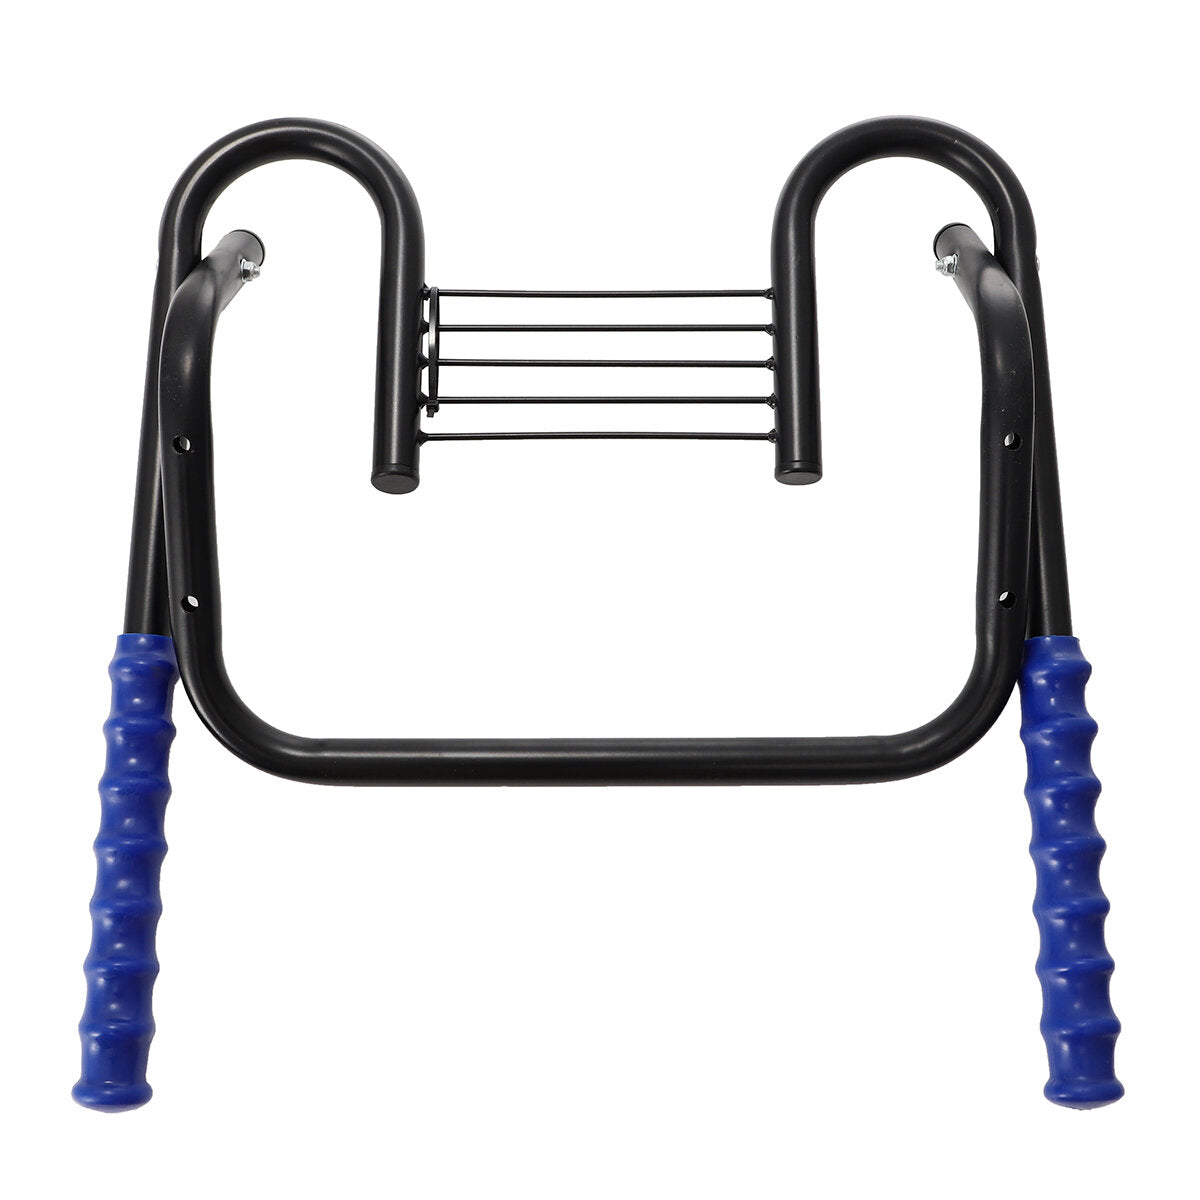 100KG Load-bearing Wall Mount Bicycle Foldable Storage Rack Bike Wall Hanging Rack Heavy Duty Bicycle Holder Hook Rubber